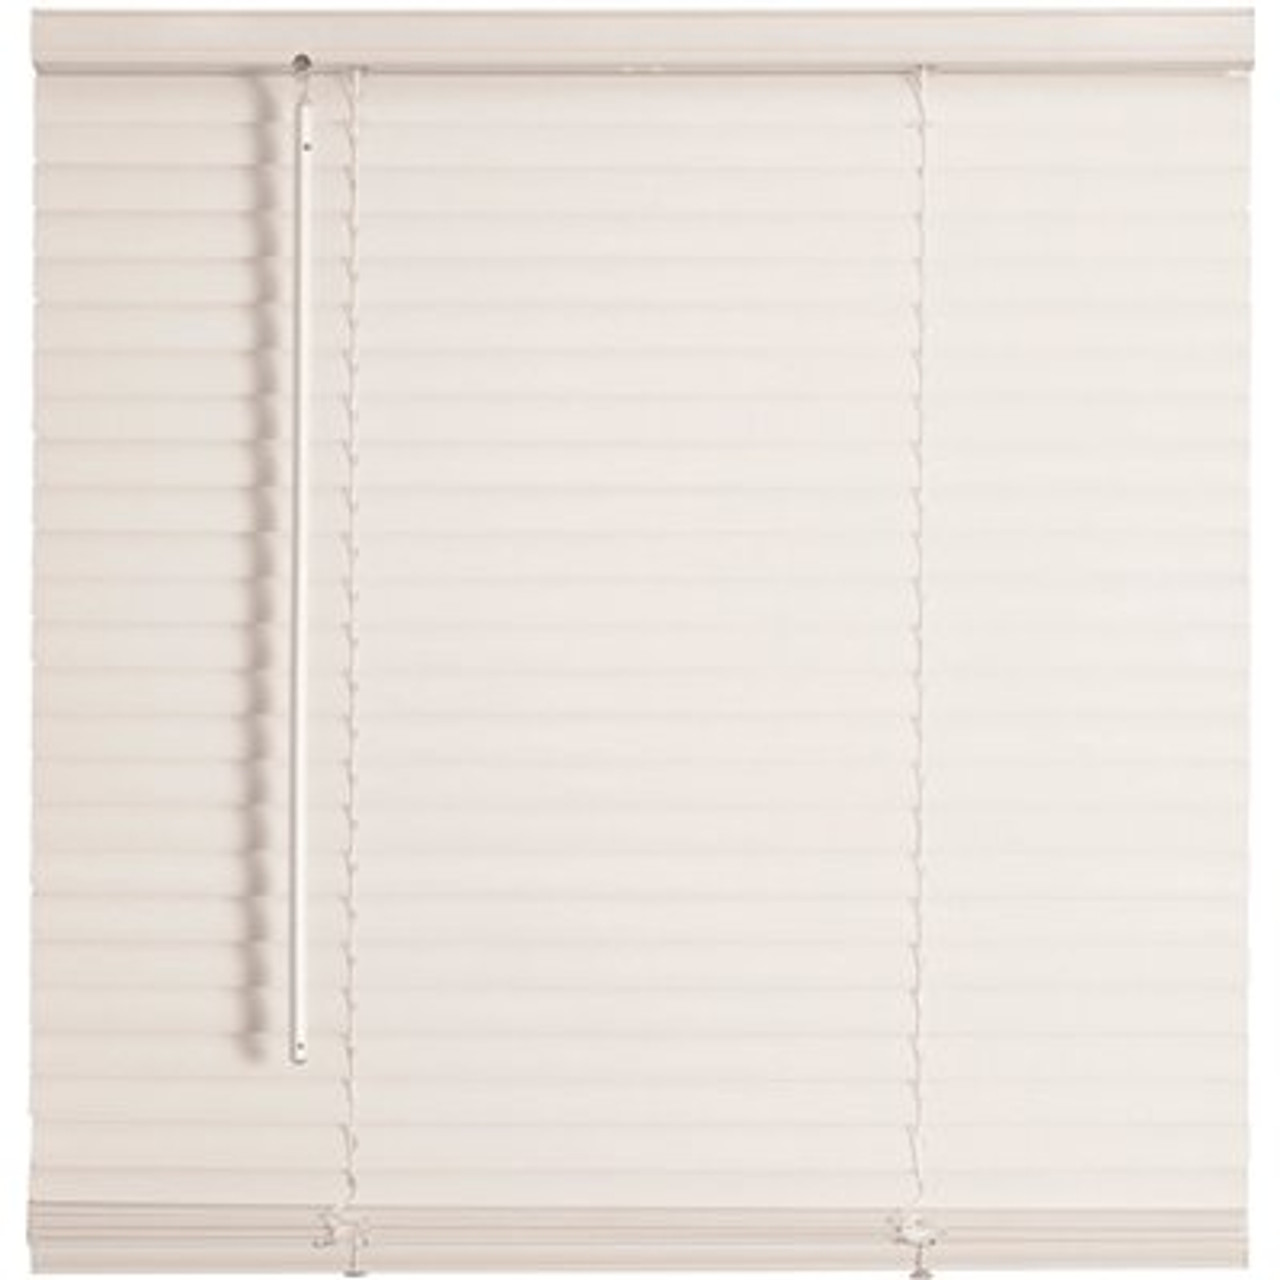 Champion Trutouch White Cordless Light Filtering Vinyl Mini Blinds With 1 In. Slats 59 In. W X 72 In. L